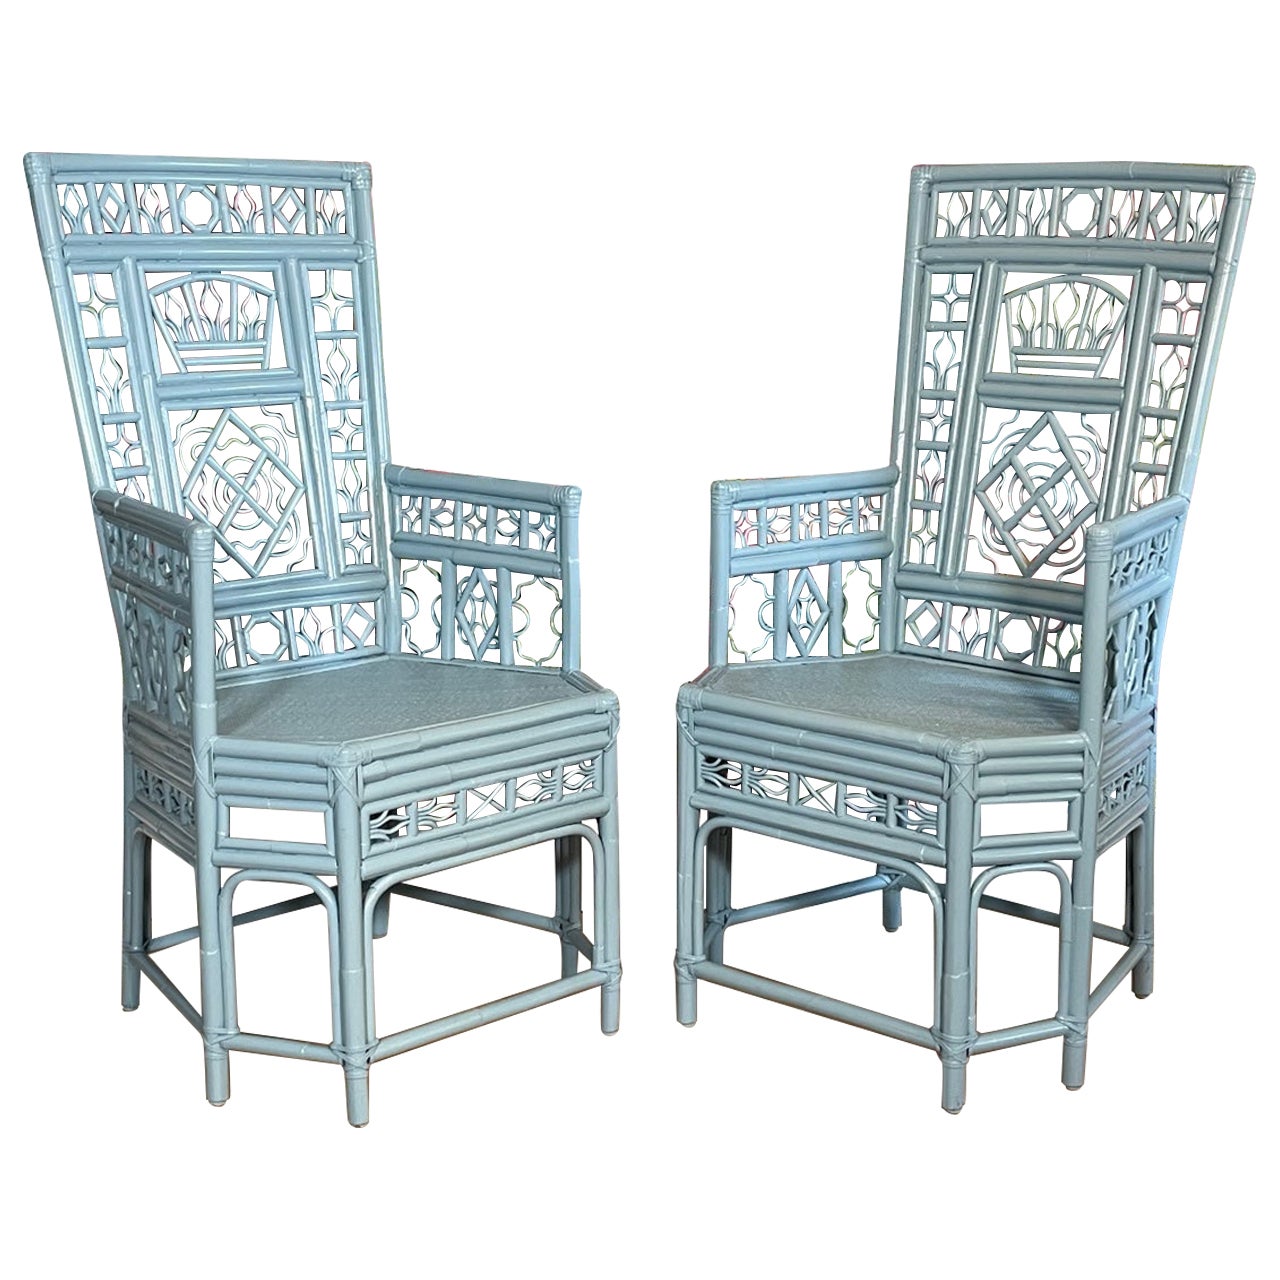 Rattan Brighton Pavilion Style High Back Arm Chairs, A Pair For Sale